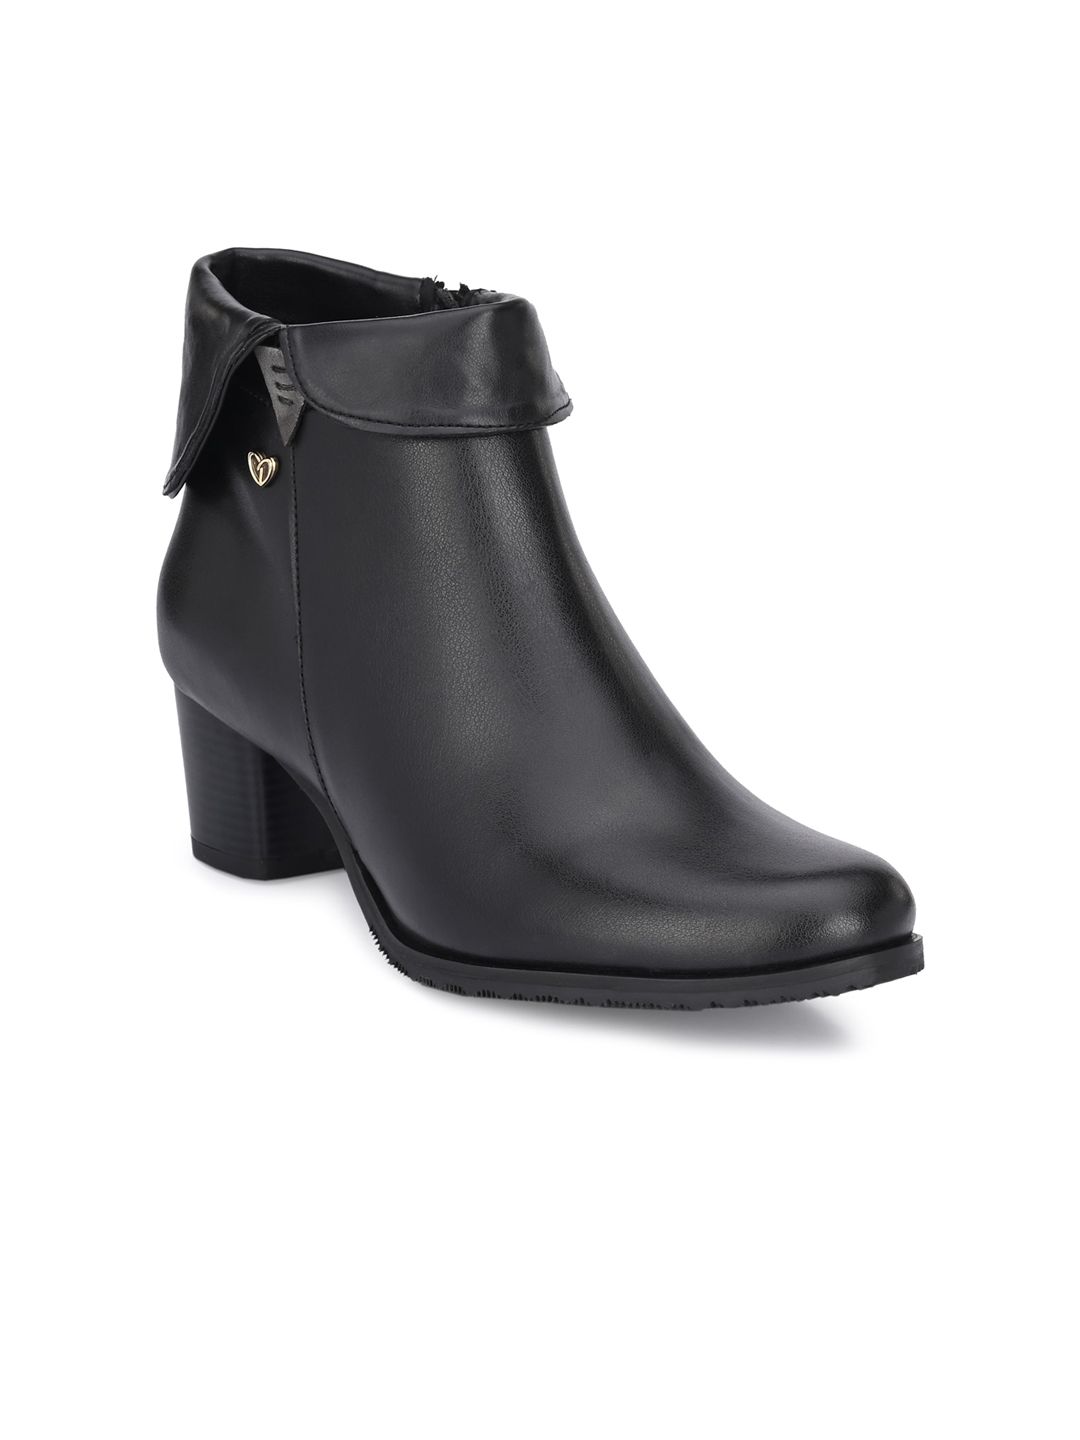 Delize Black Mid-Top Block Heeled Boots Price in India